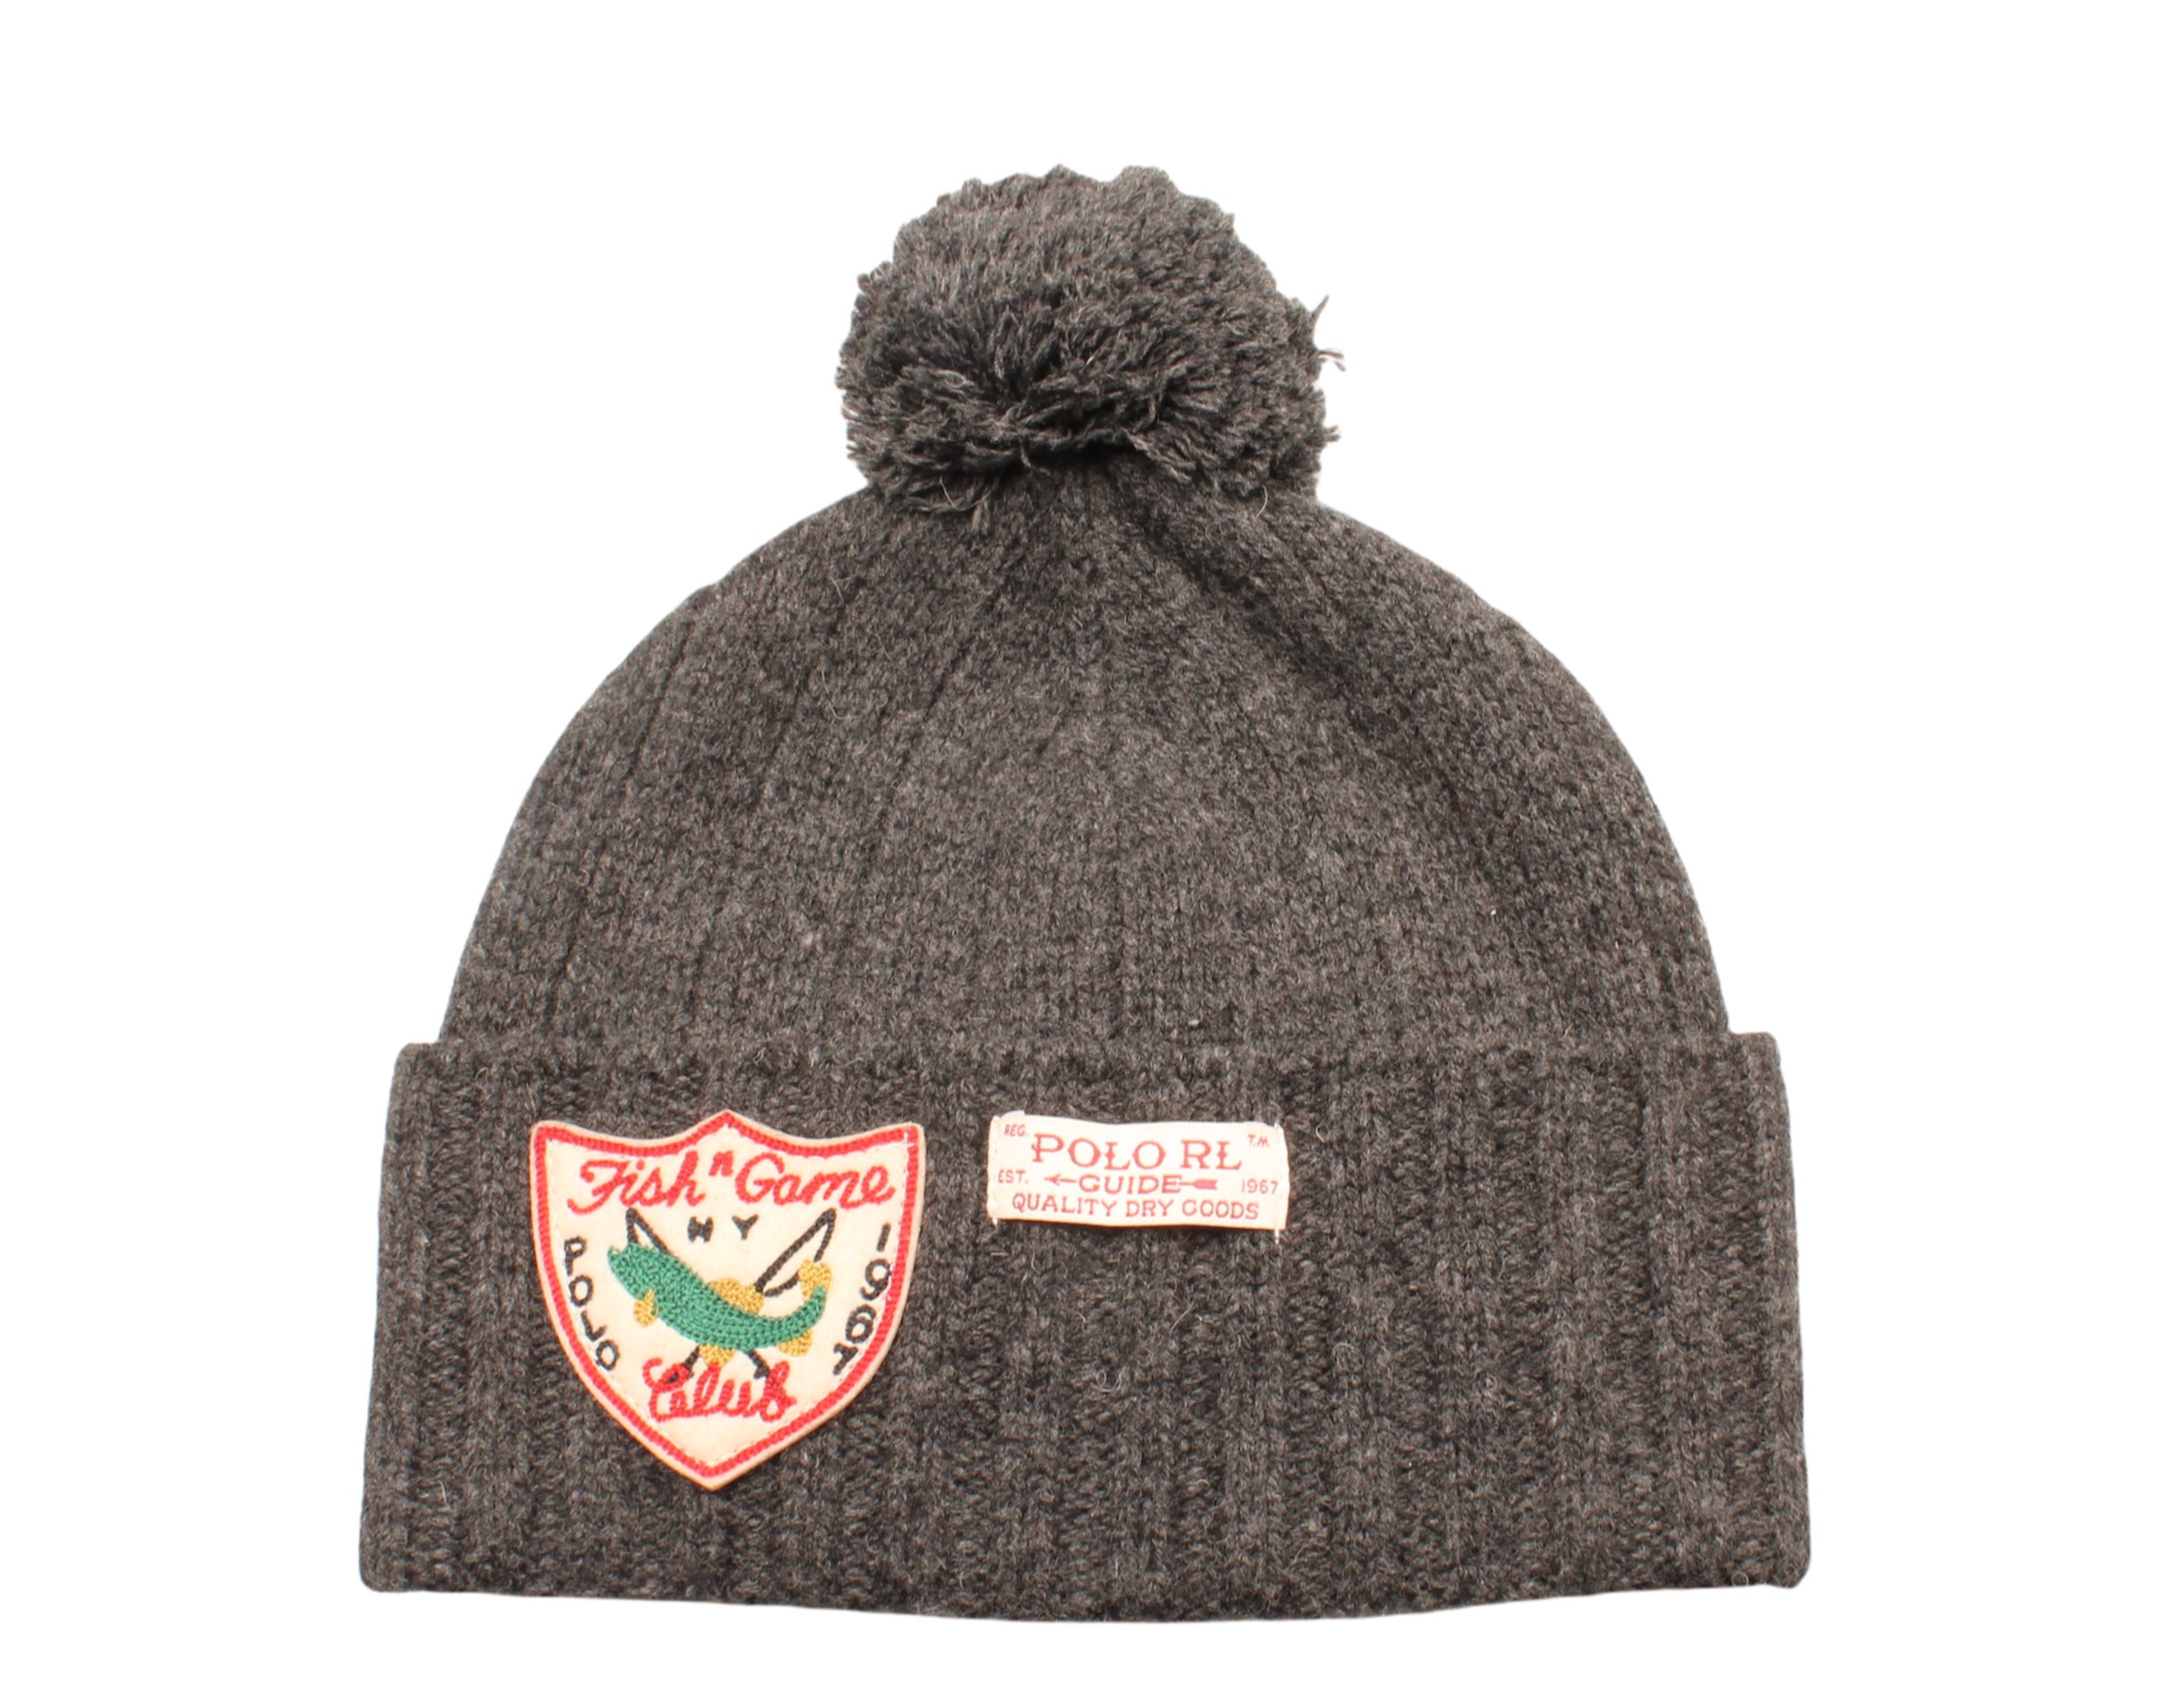 Polo Ralph Lauren Wool Expedition Pom-Pom Cuff Knit Hat – NYCMode